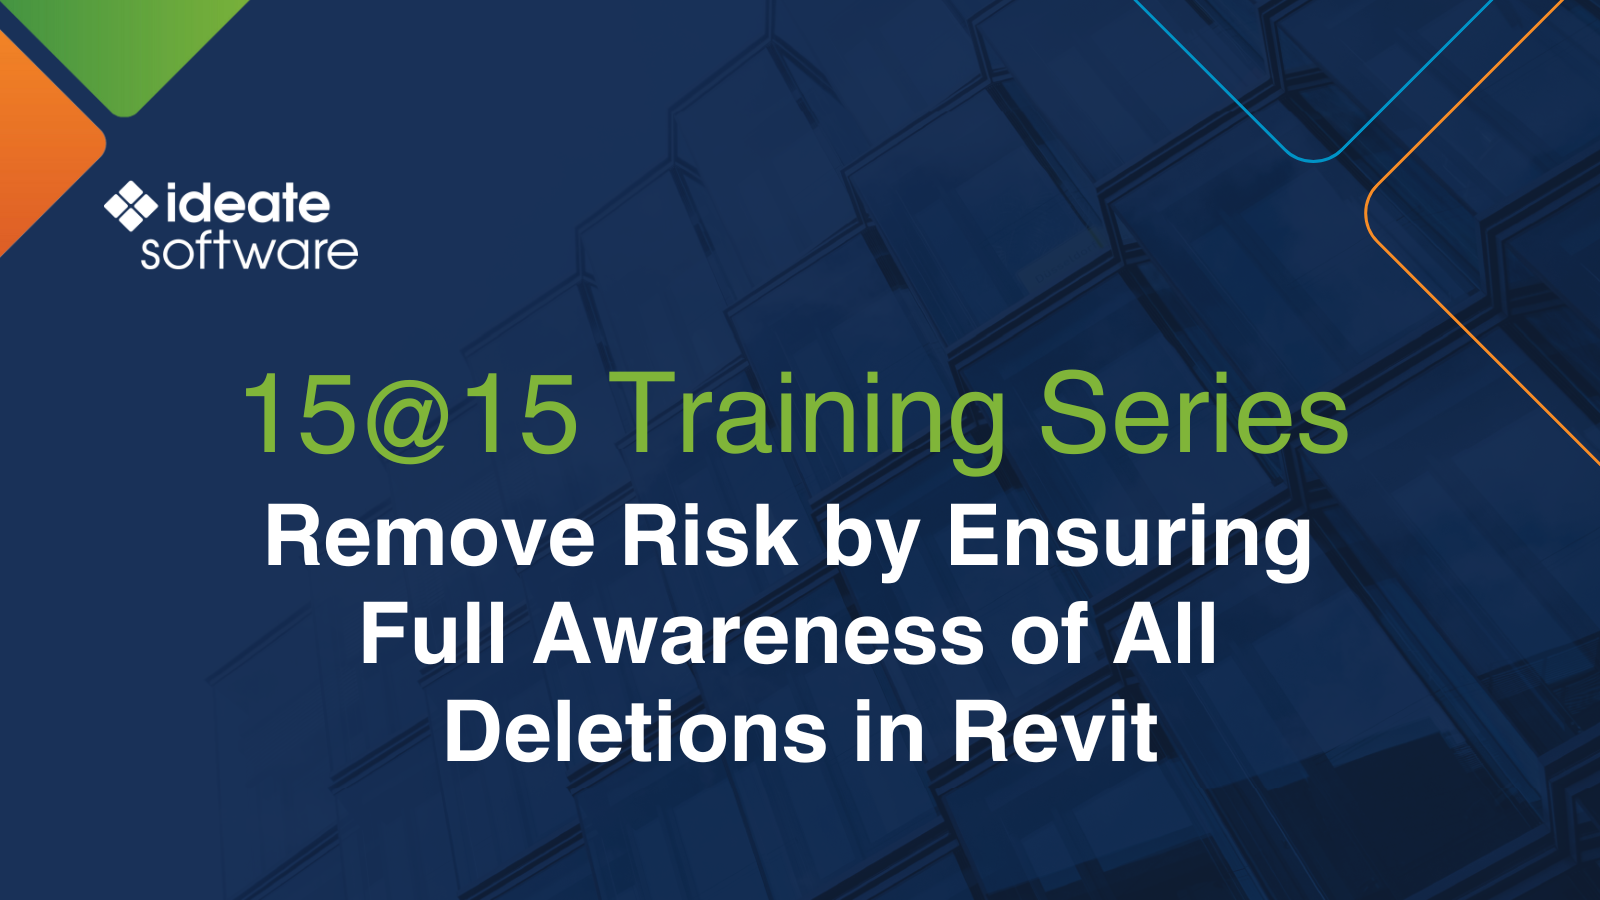 15@15: Remove Risk by Ensuring Full Awareness of All Deletions in Revit